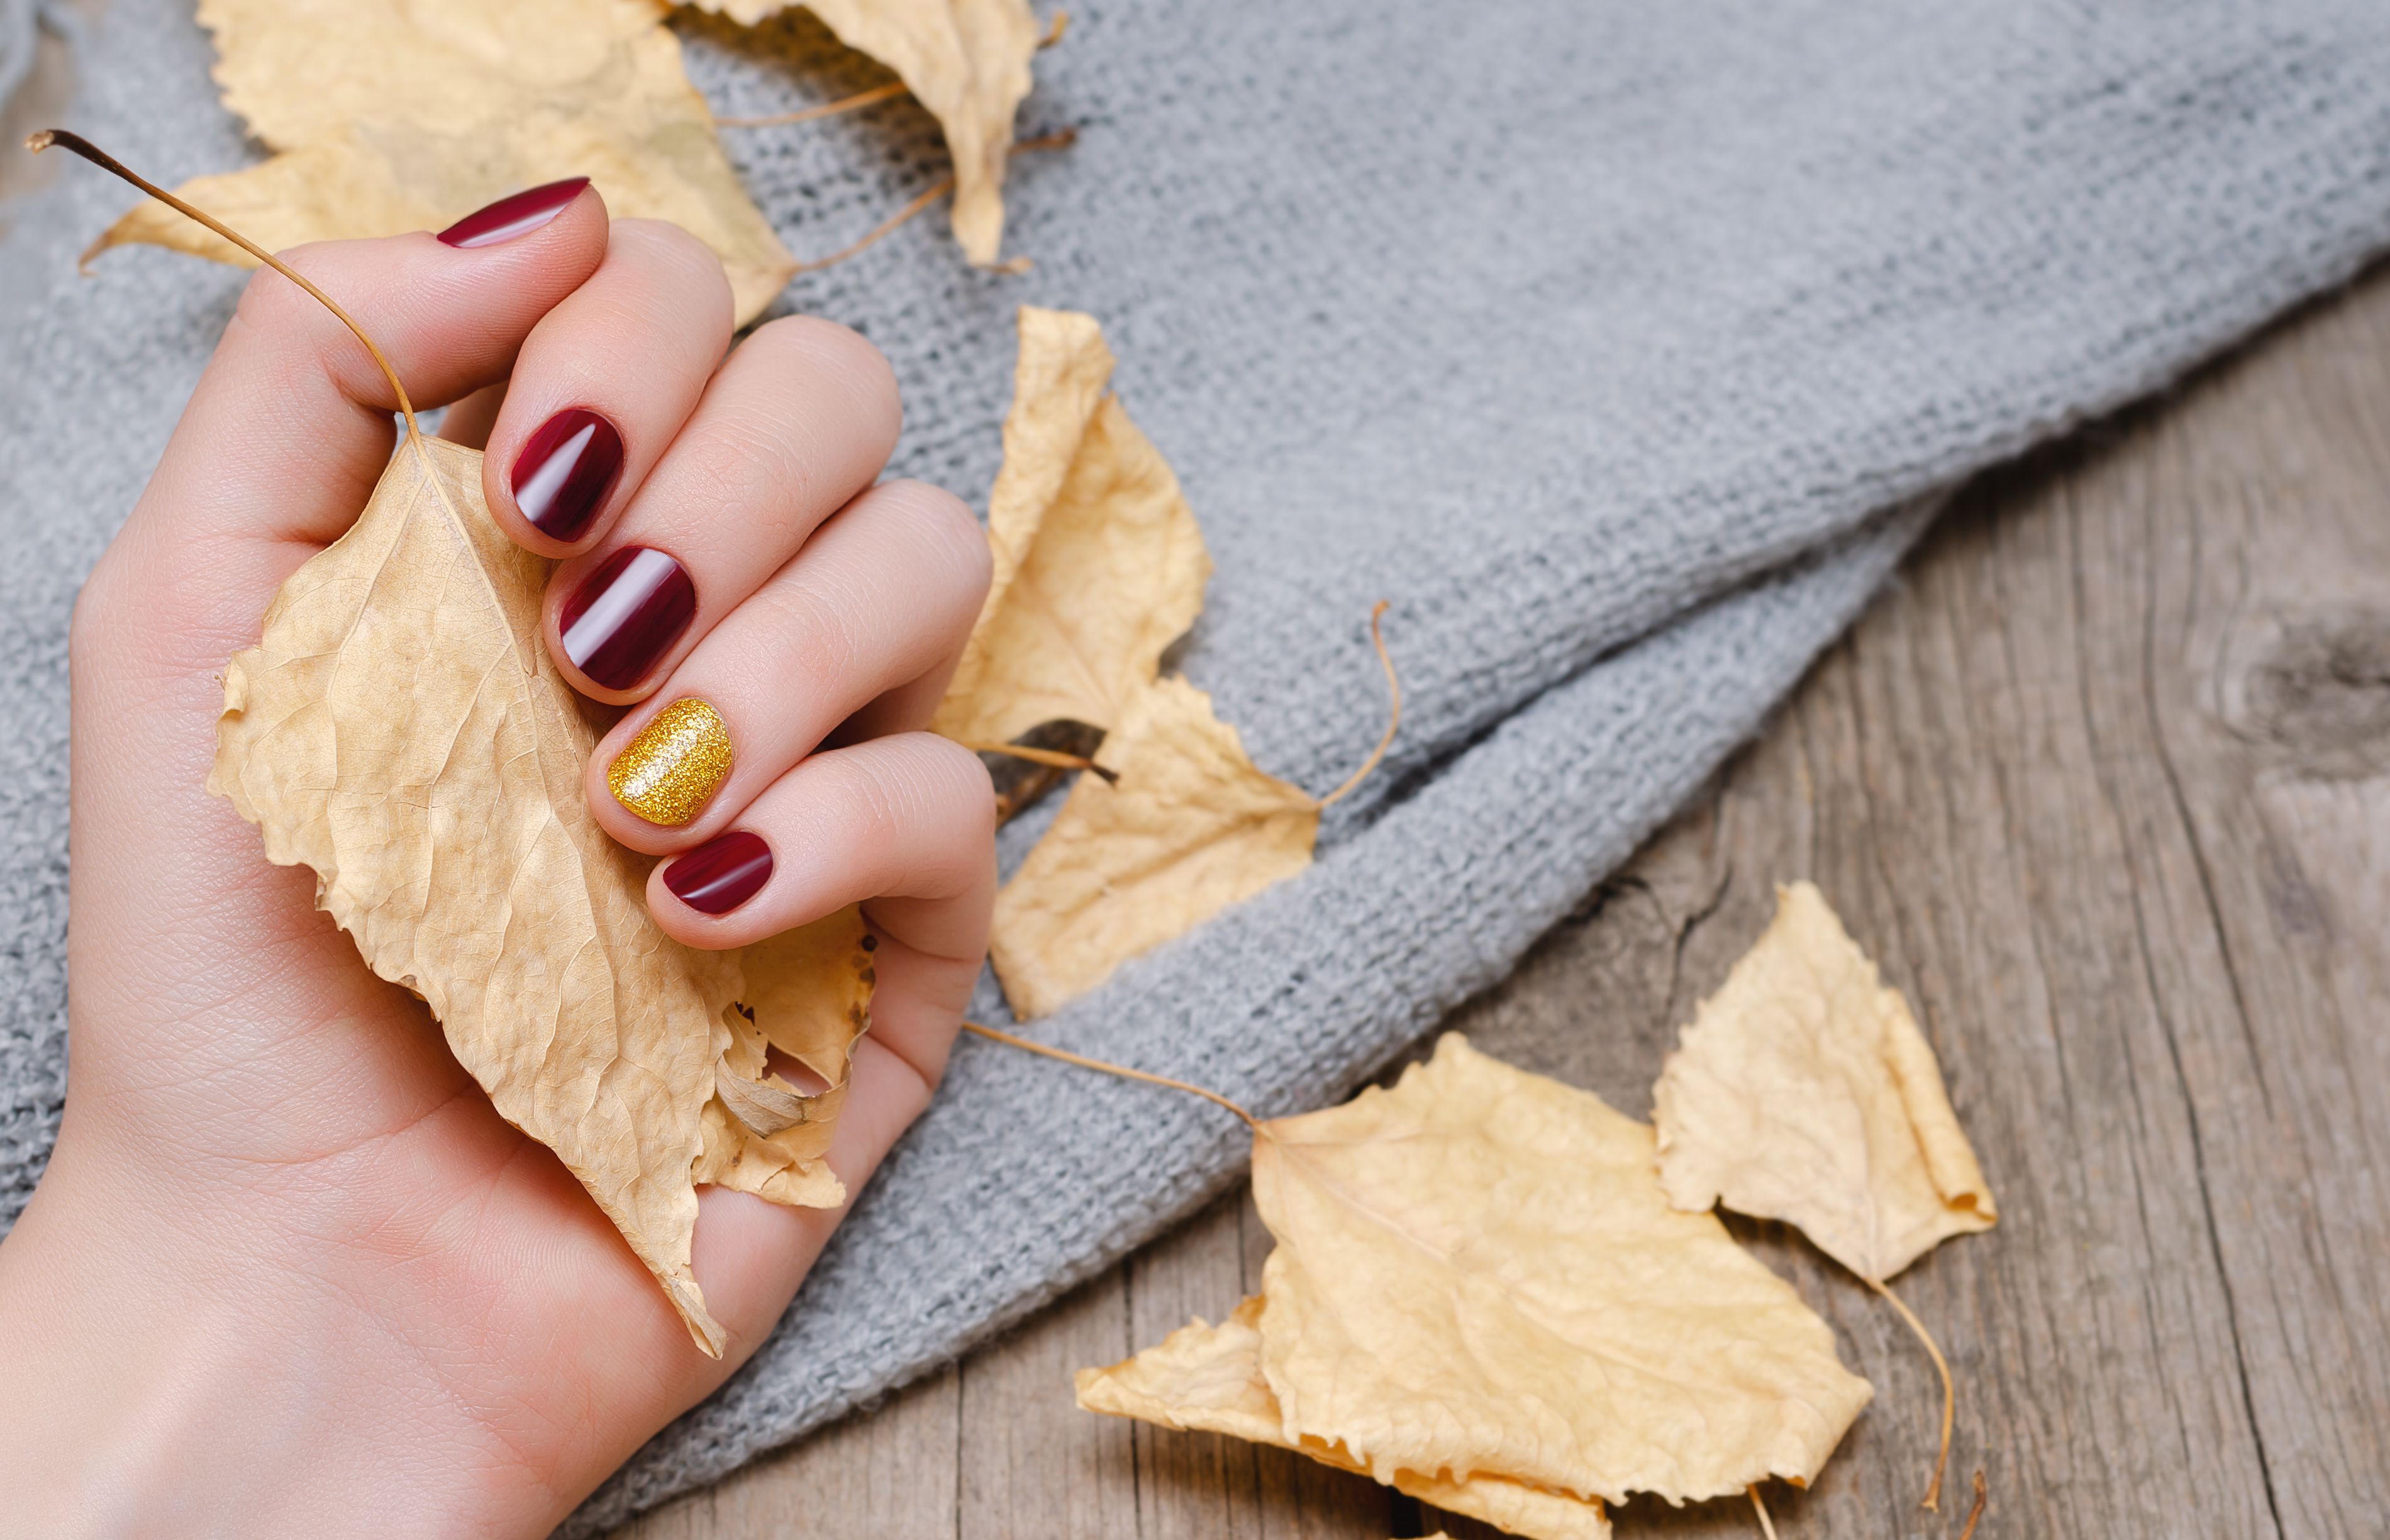 3. "Fall Nail Art Inspiration: Colorful Designs for Autumn" - wide 1